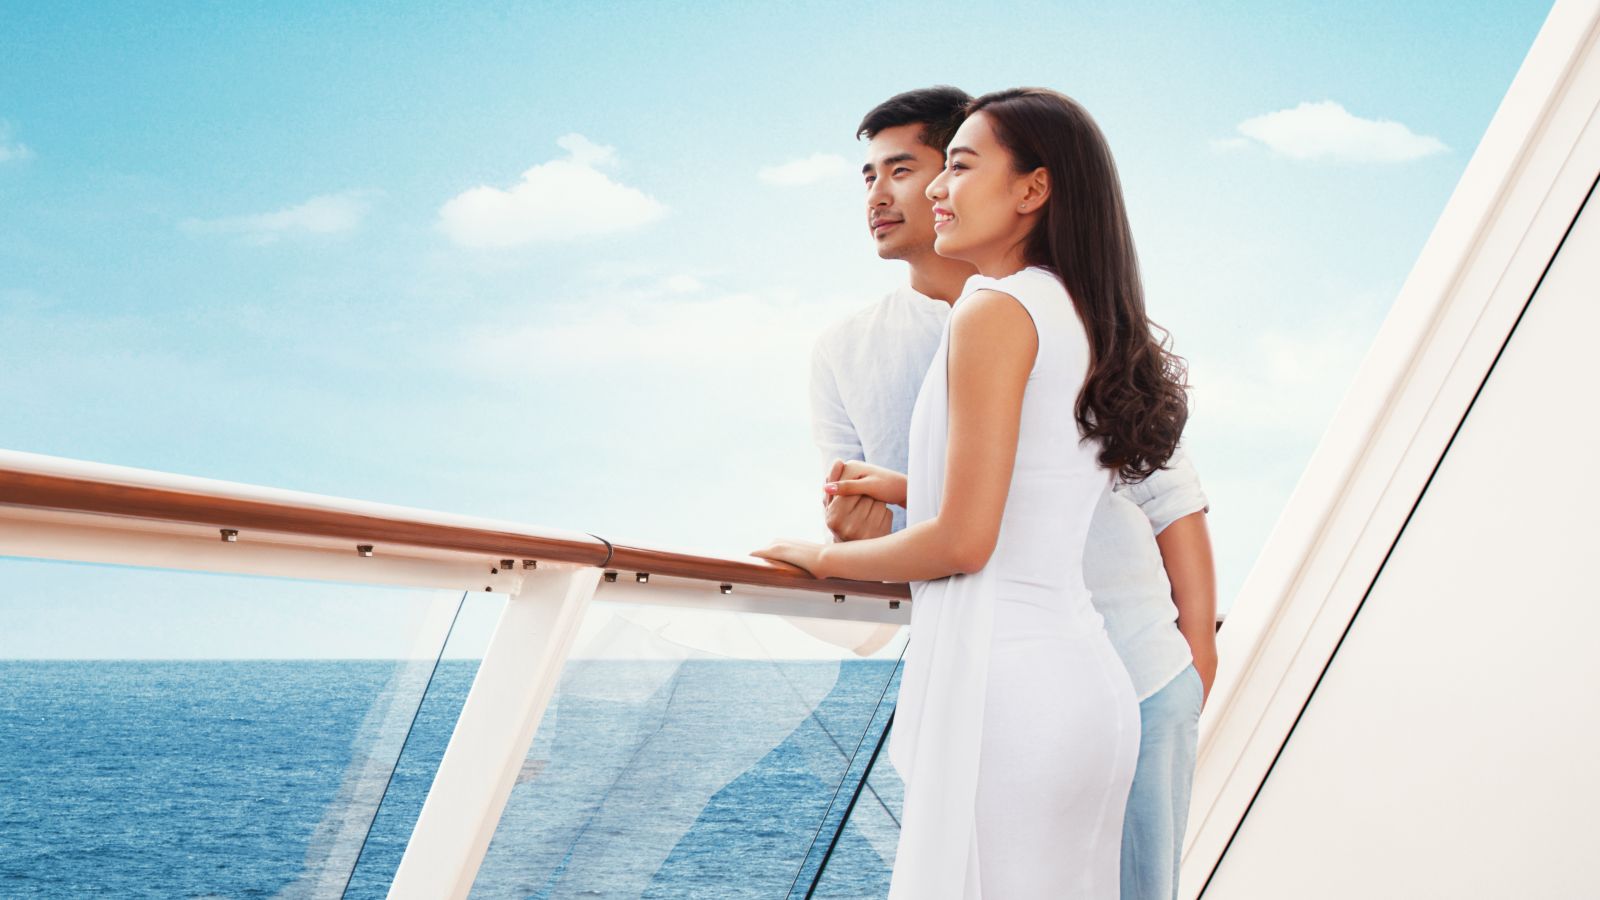 Choose a cruise to fully unwind and relax at sea